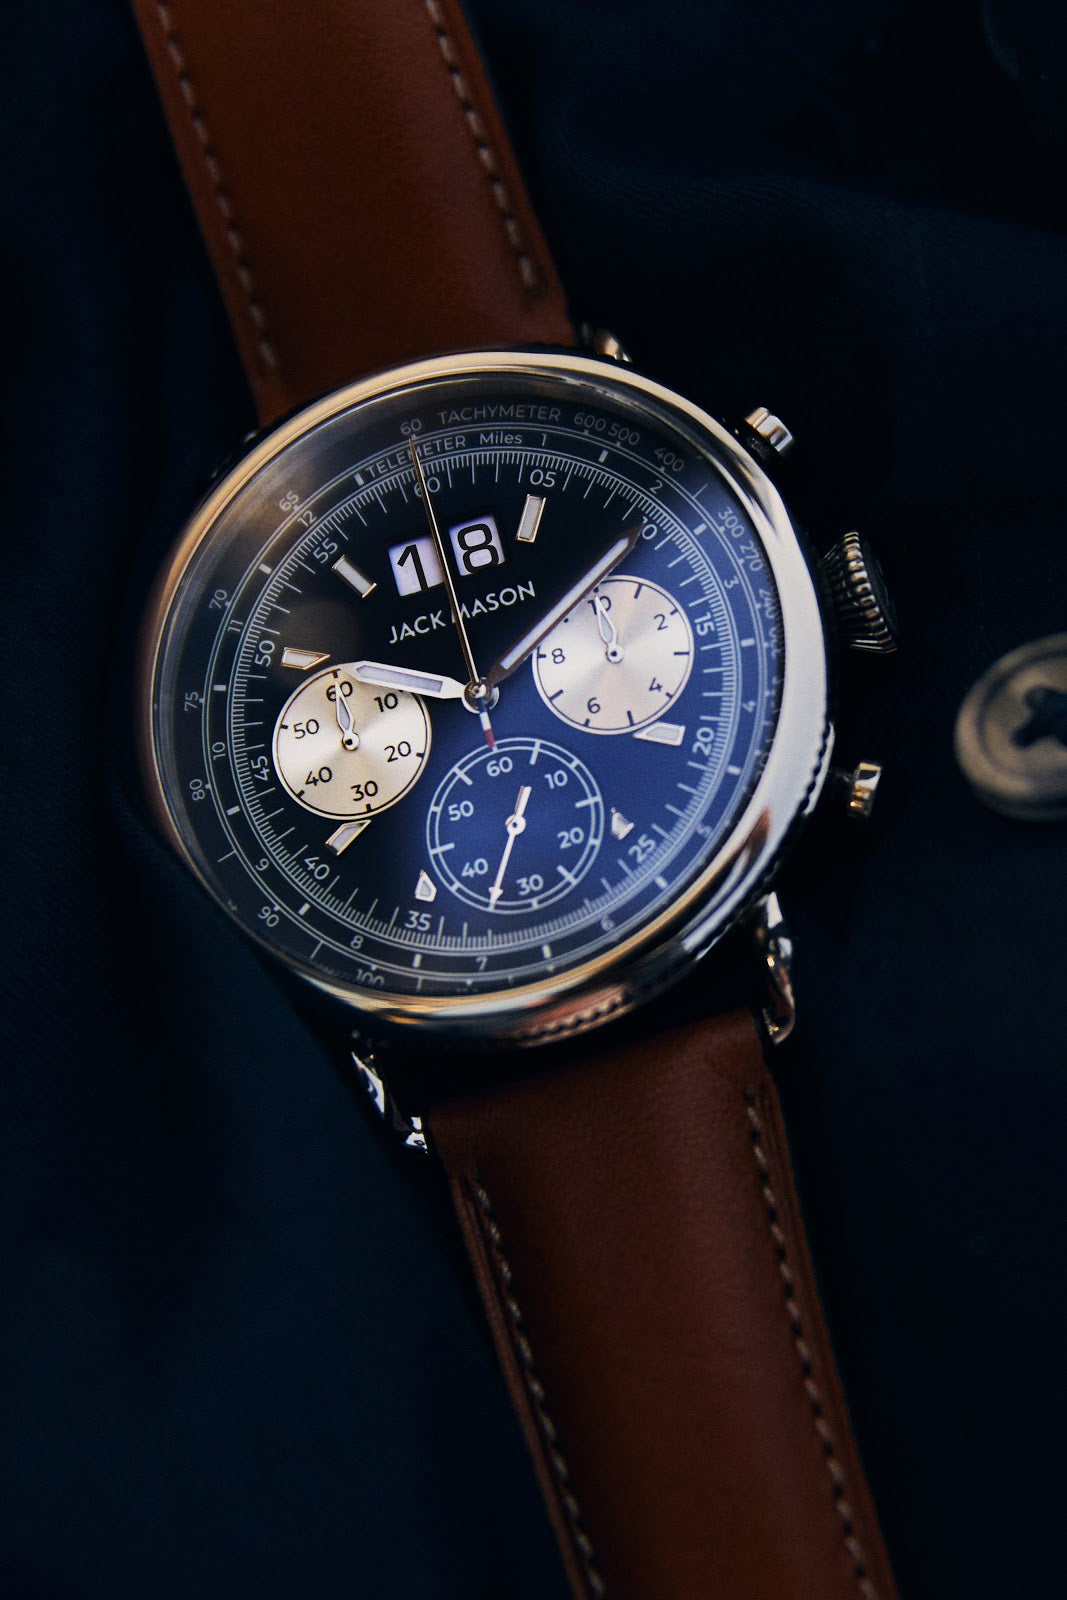 What's an Aviator Watch, and How Does It Work?